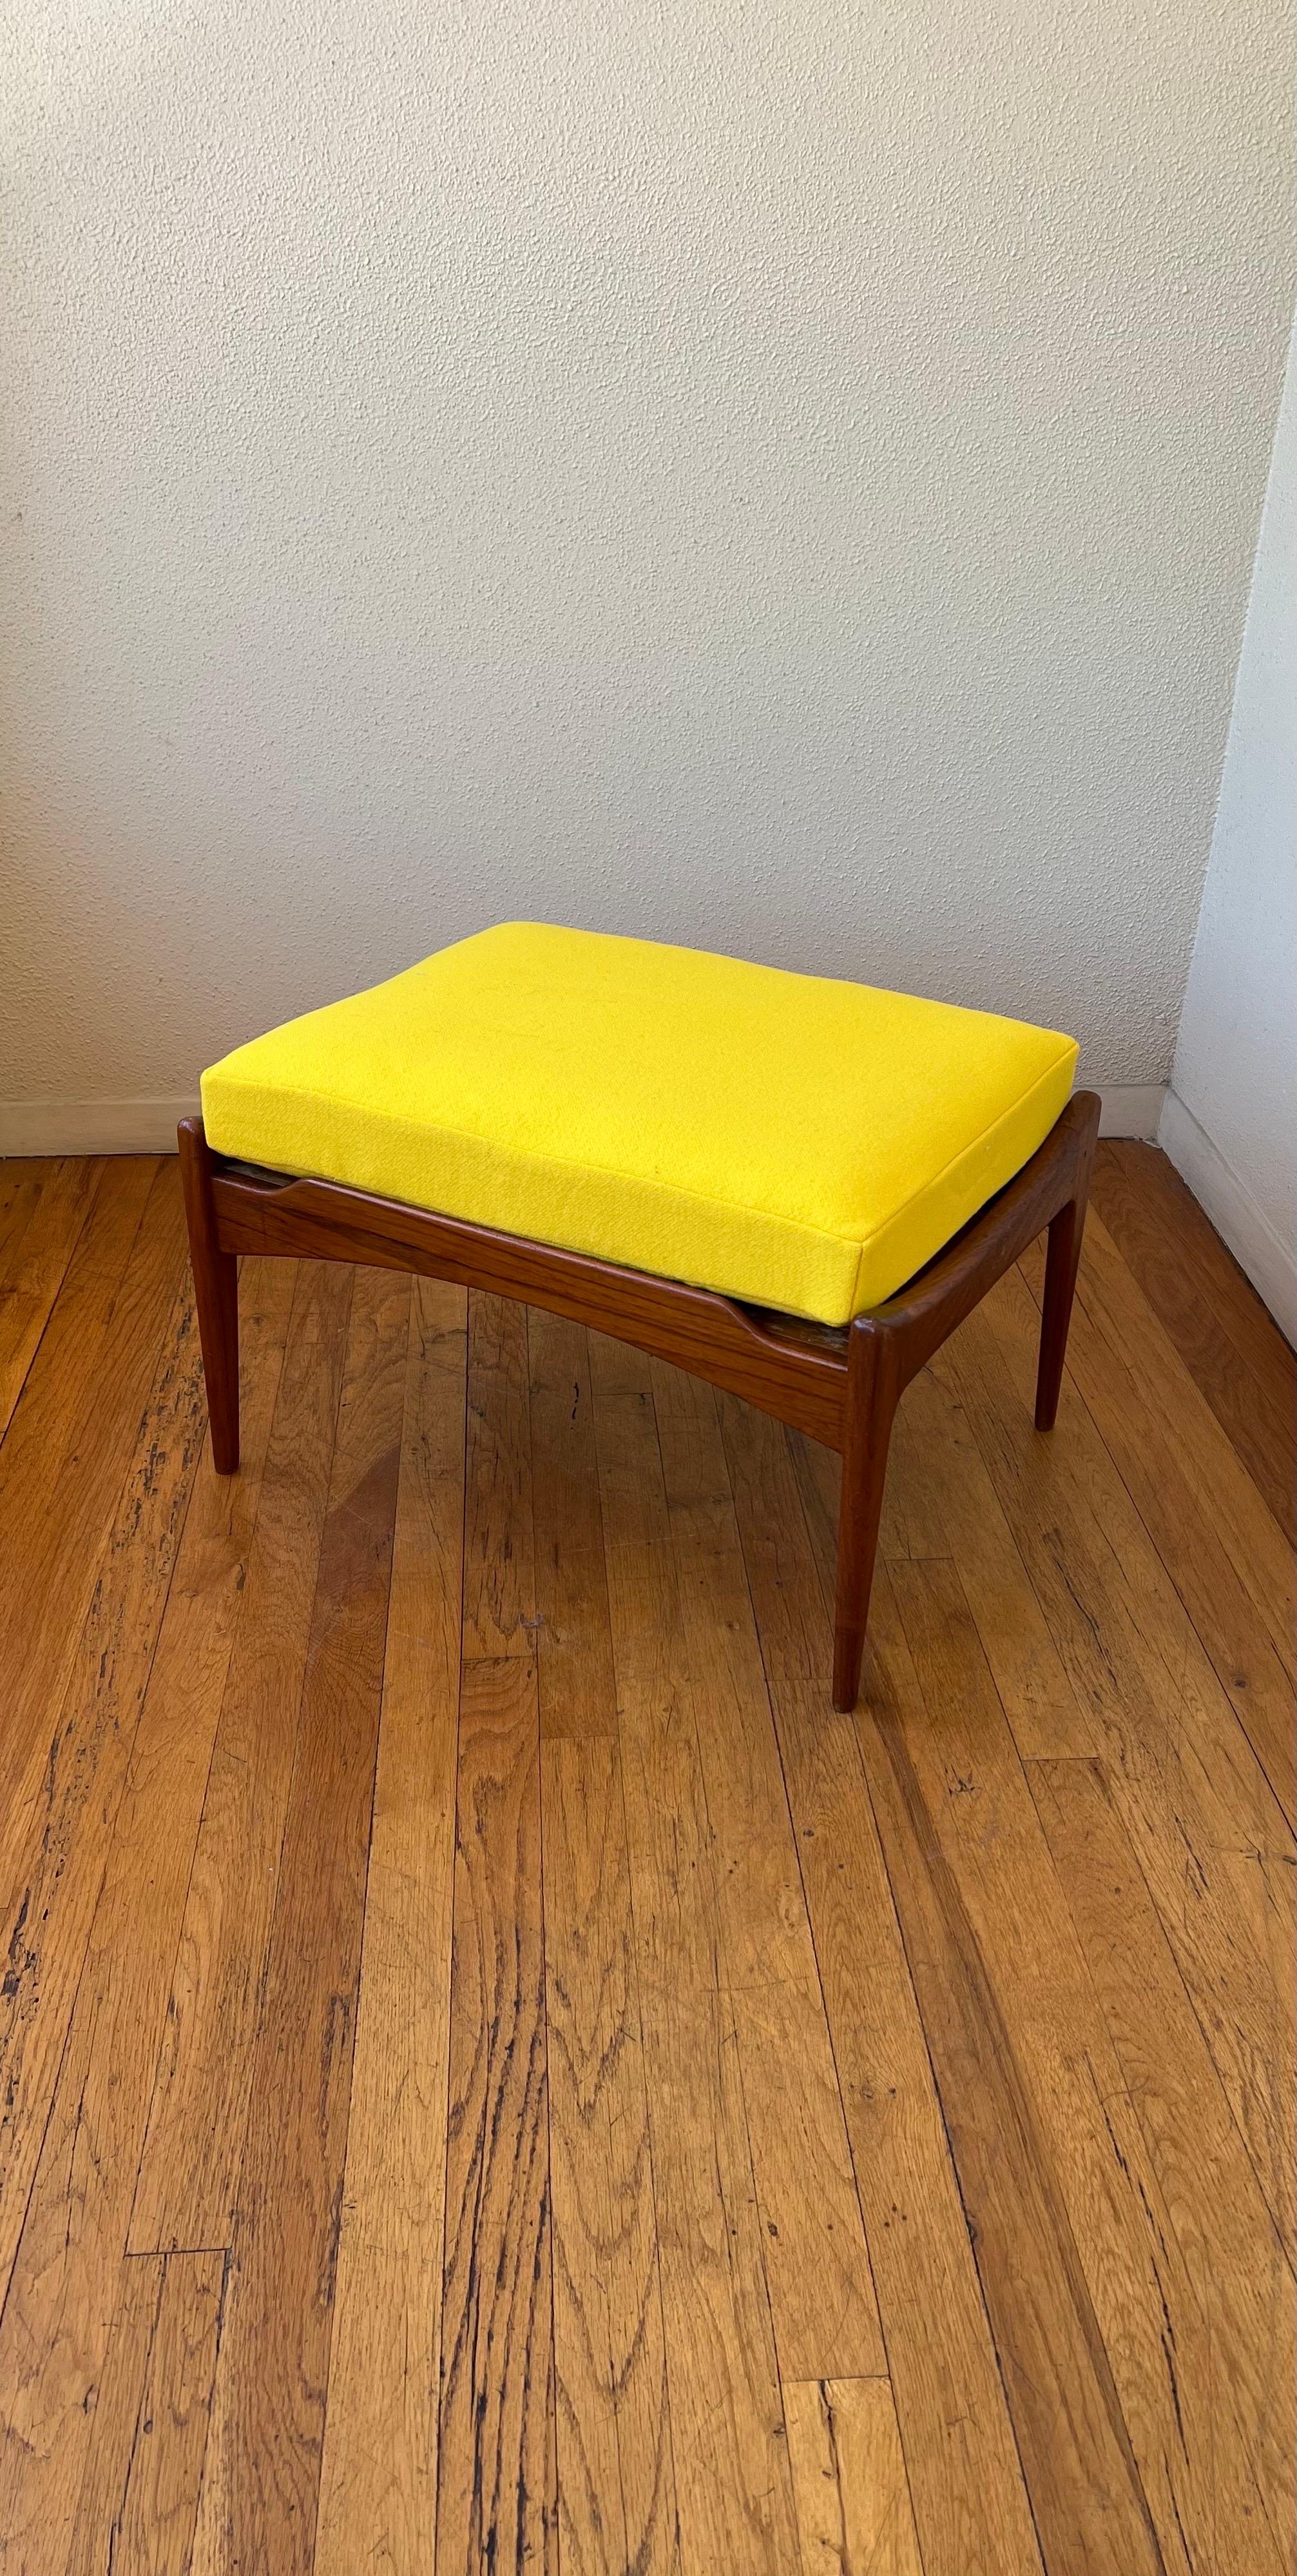 Rare solid teak ottoman designed by Kofod Larsen for Selig we have cleaned and oiled the base put new straps and new fabric by, Maharam its missing the medallion tag as shown on the picture.